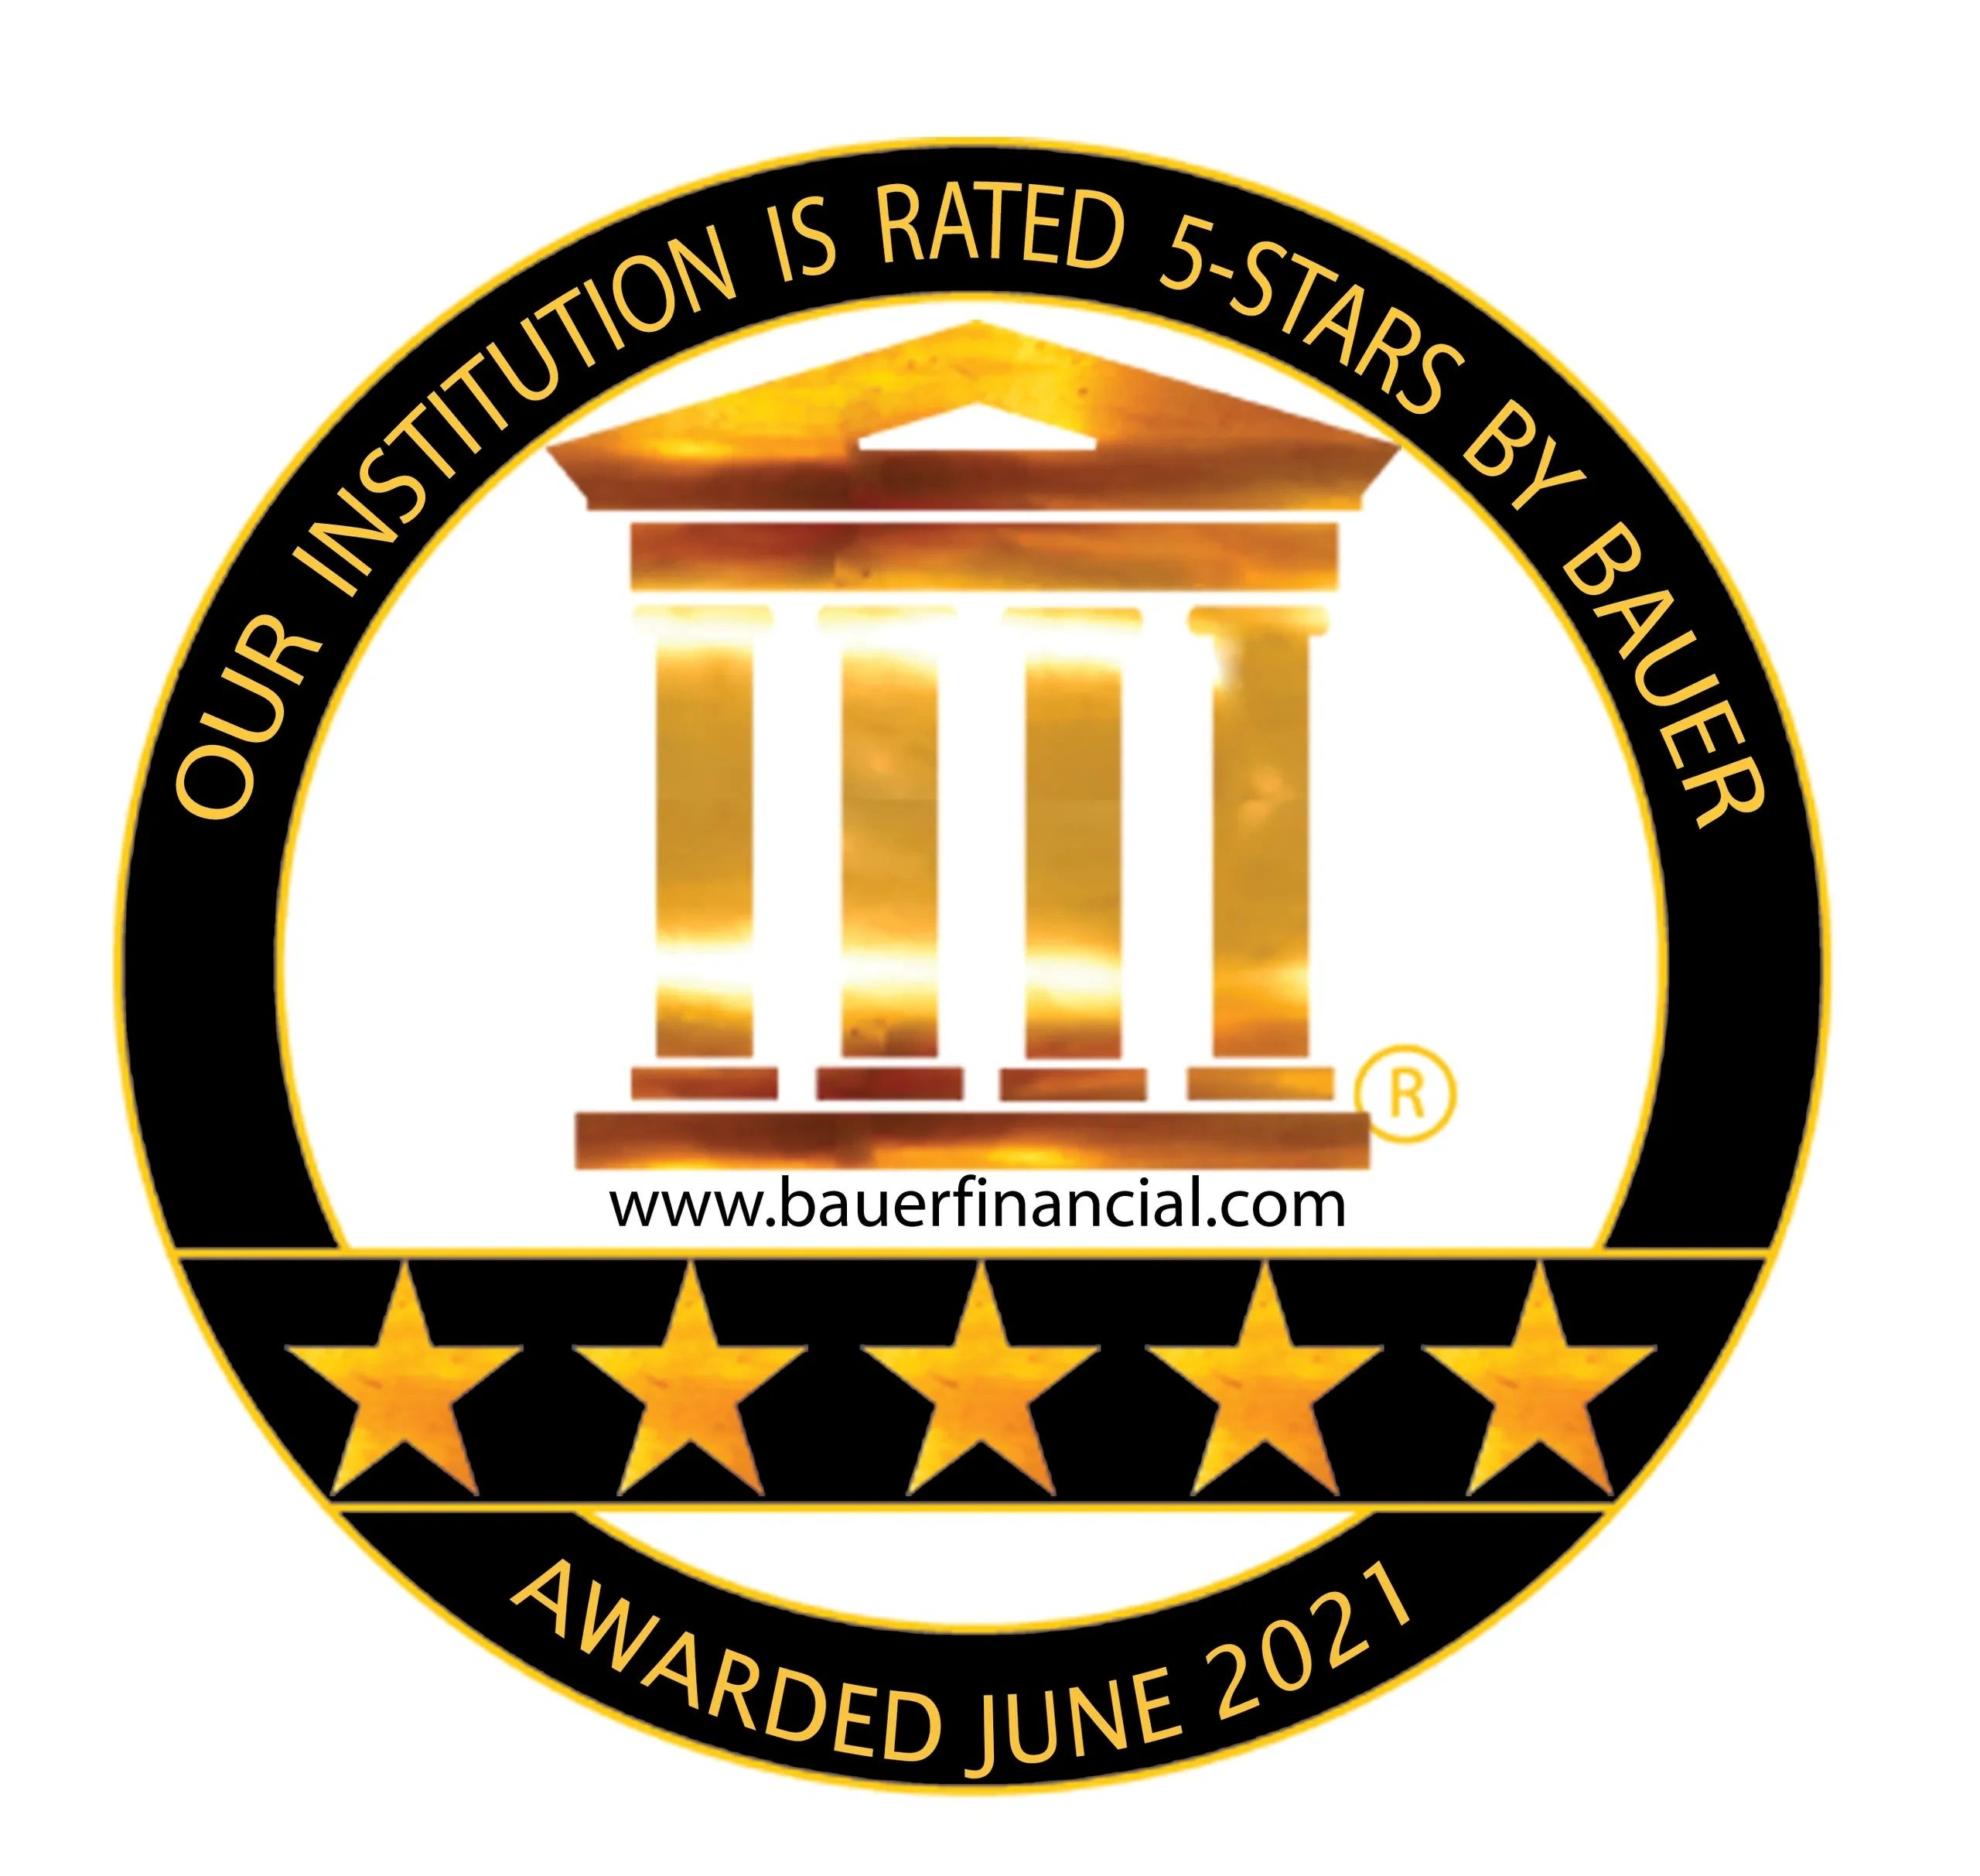 Bauer Financial 5-star rating for INTEGRIS Federal Credit Union awarded June 2021.